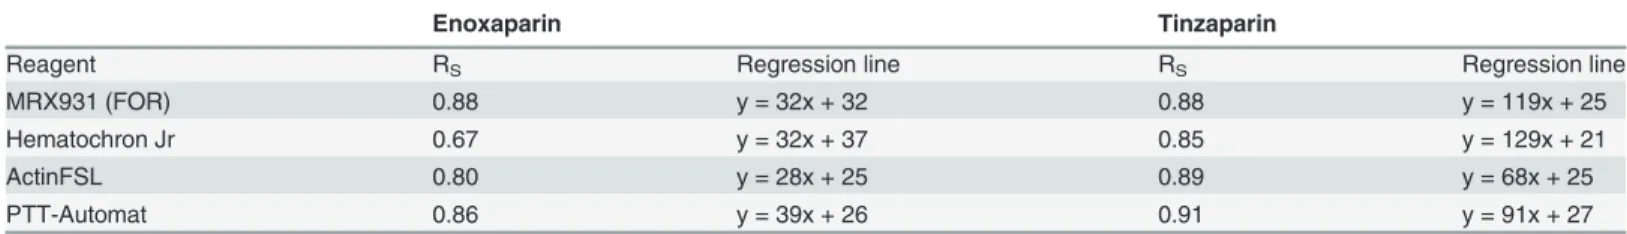 Table 2. Explanatory to Fig. 4: Correlation and regression between aPTT and Anti-FXa for enoxaparin and tinzaparin.